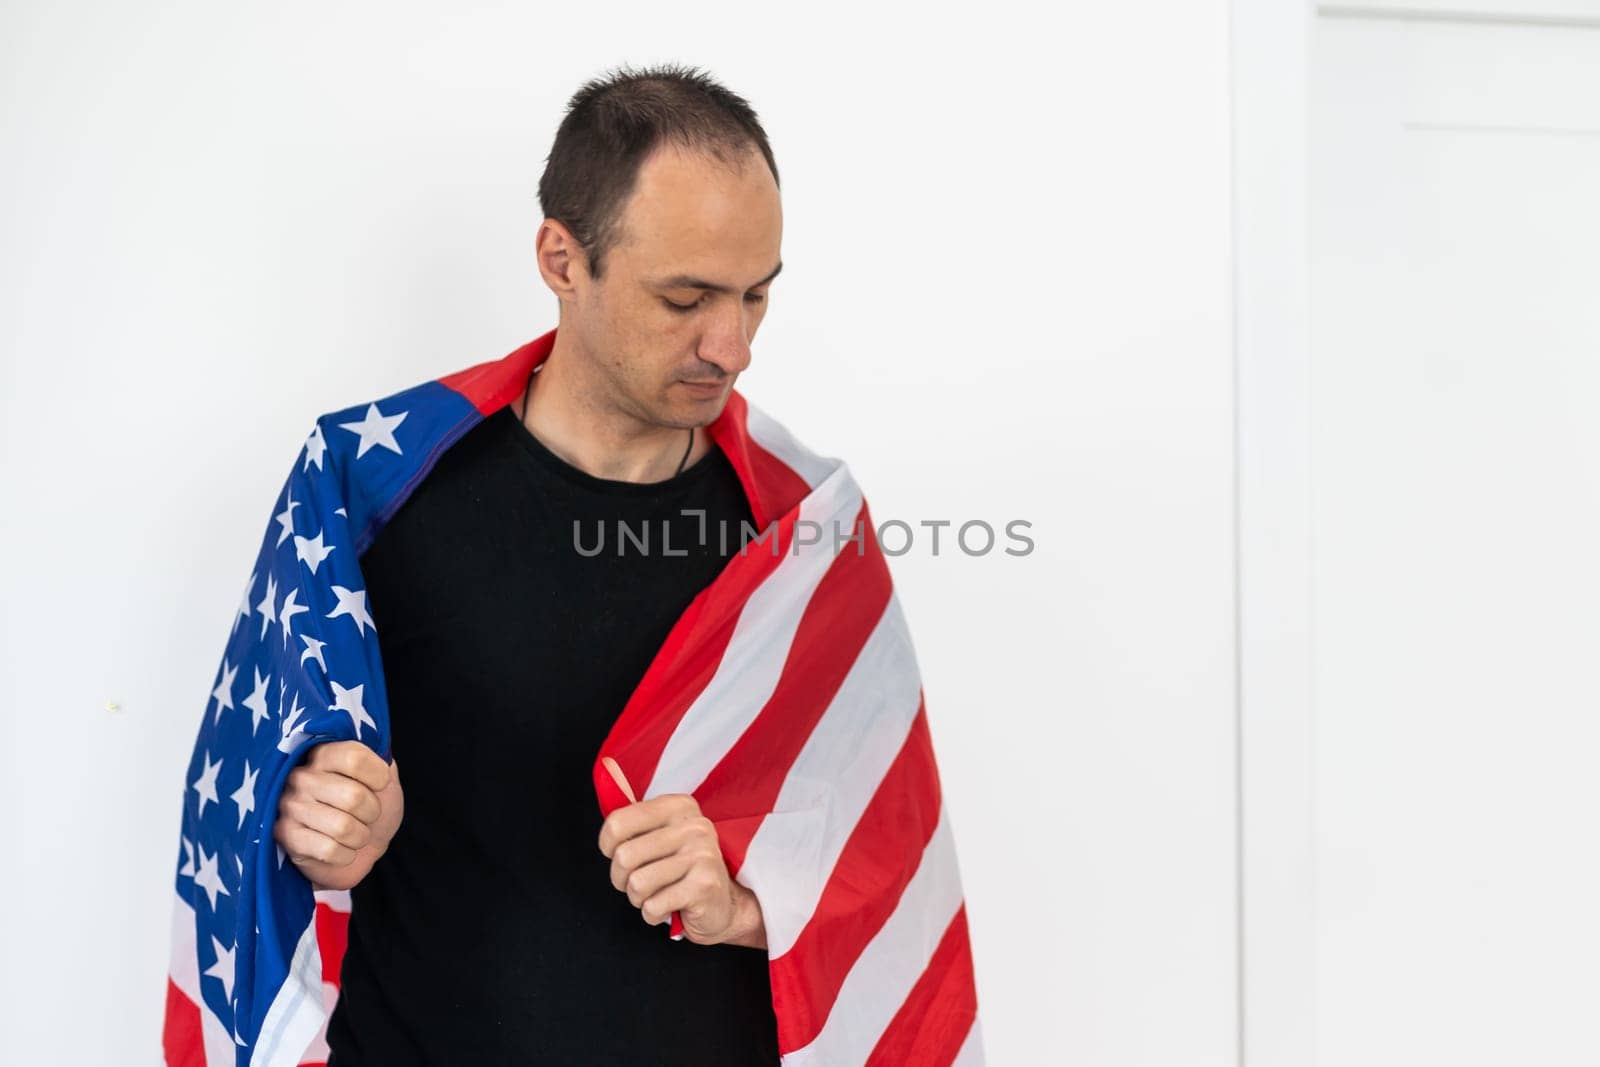 Man holding flag and posing for photoshoot. High quality photo